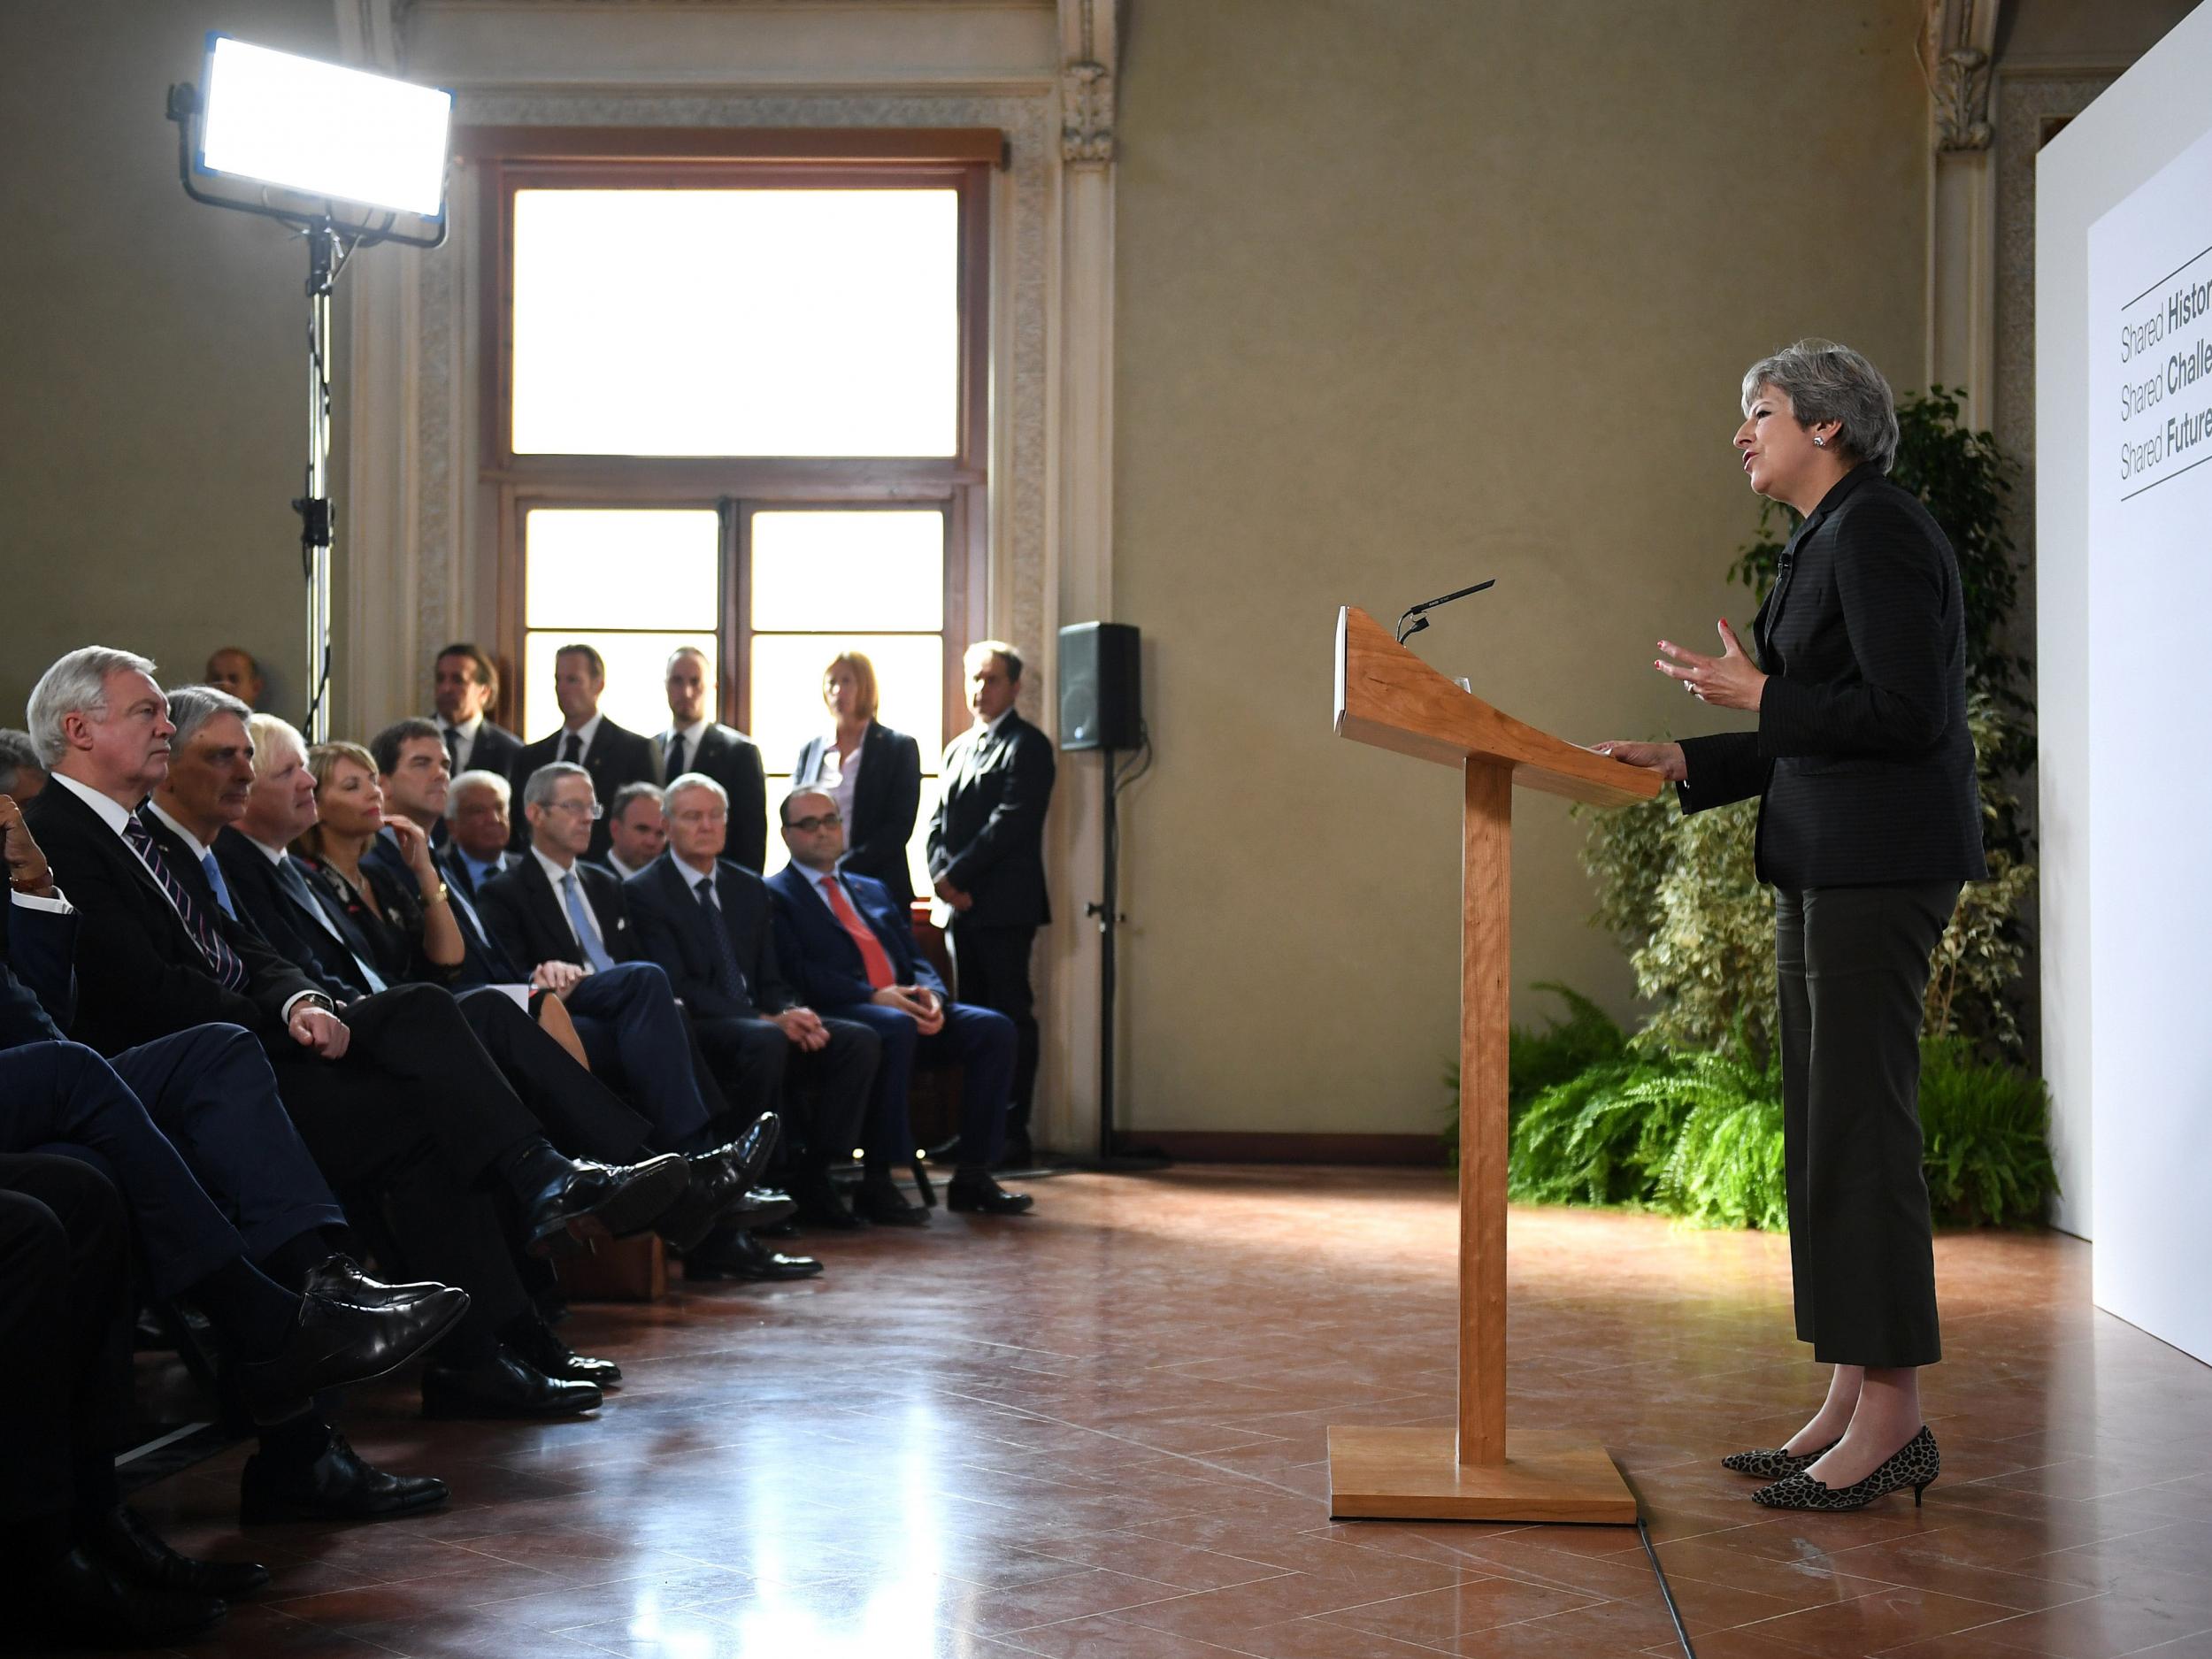 Theresa May delivers her address in Florence last month – statements since raise 'serious questions to answer'